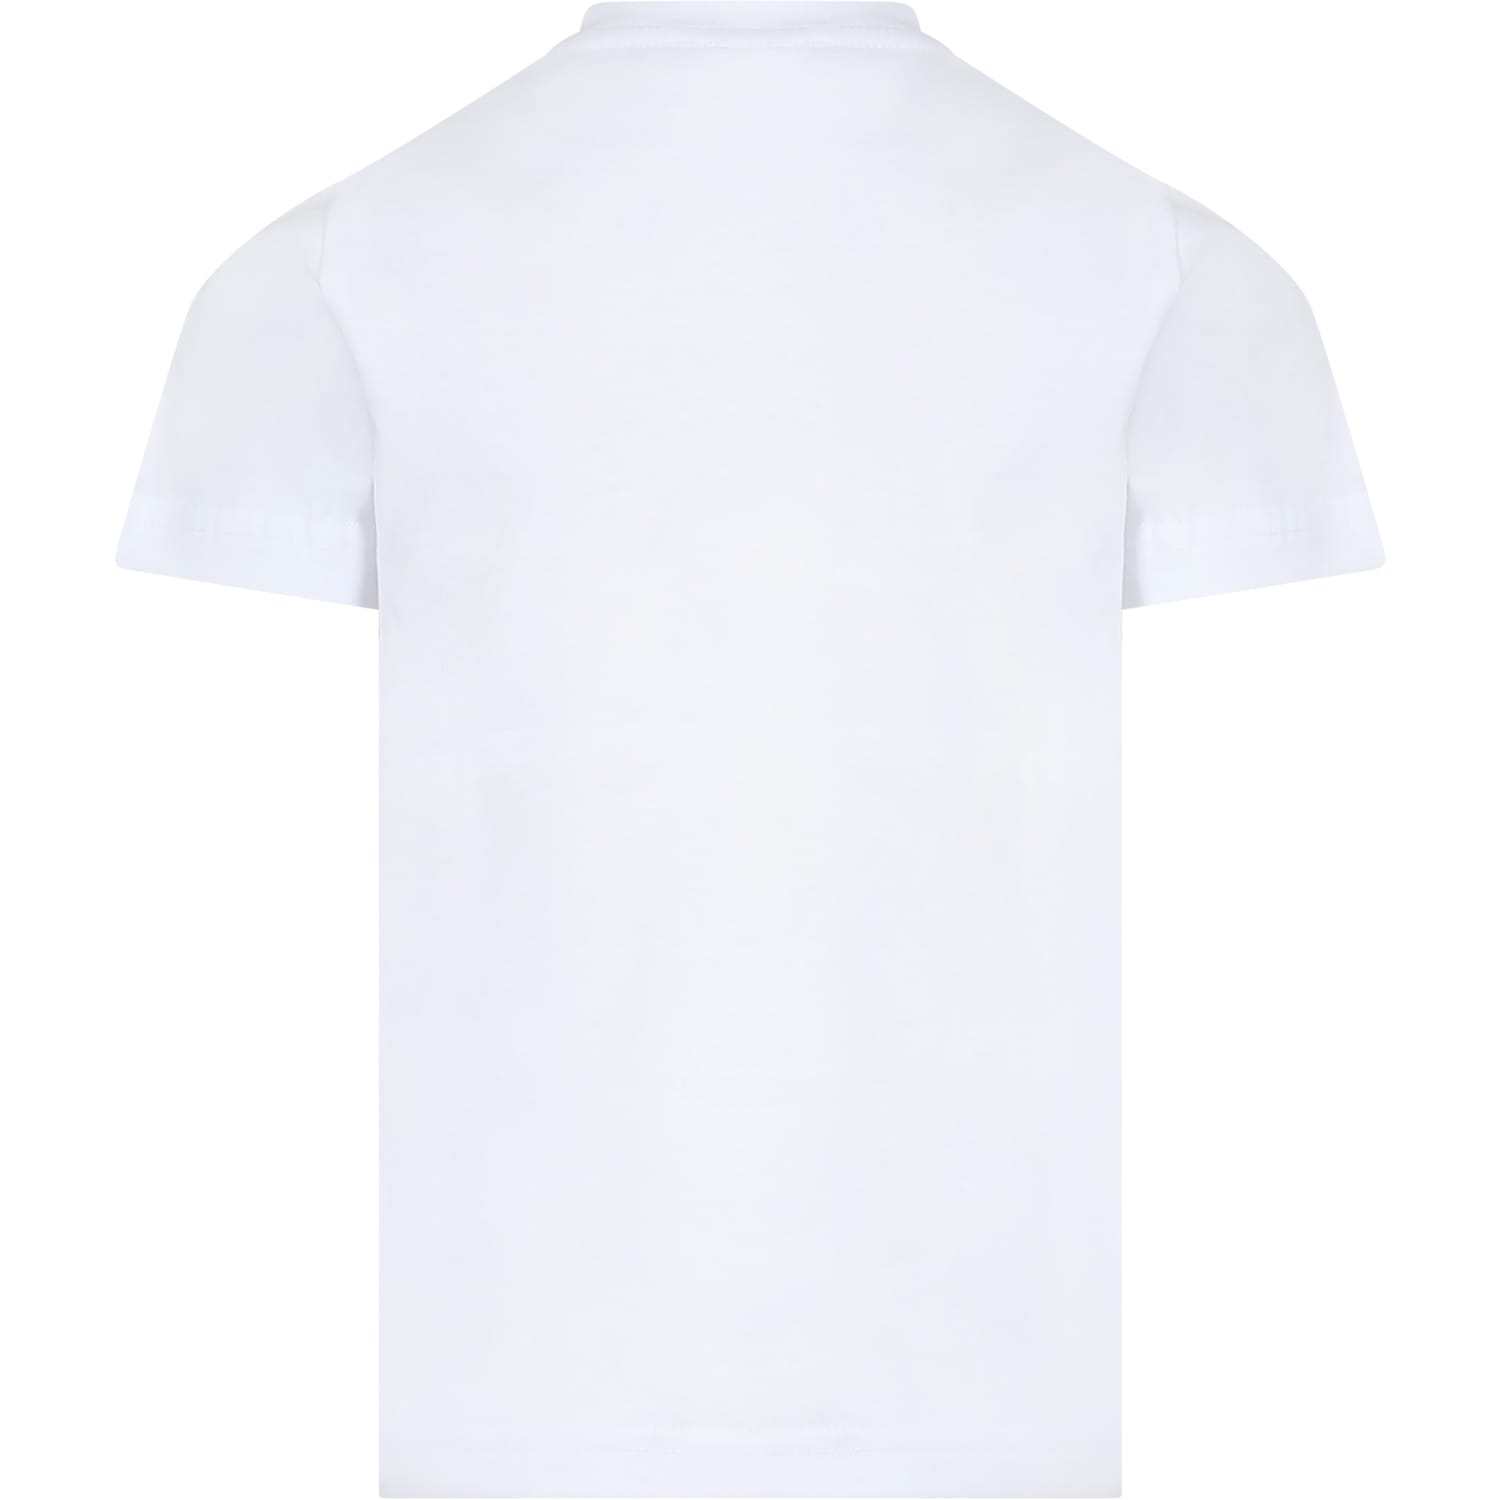 Shop Dsquared2 White T-shirt For Boy With Logo